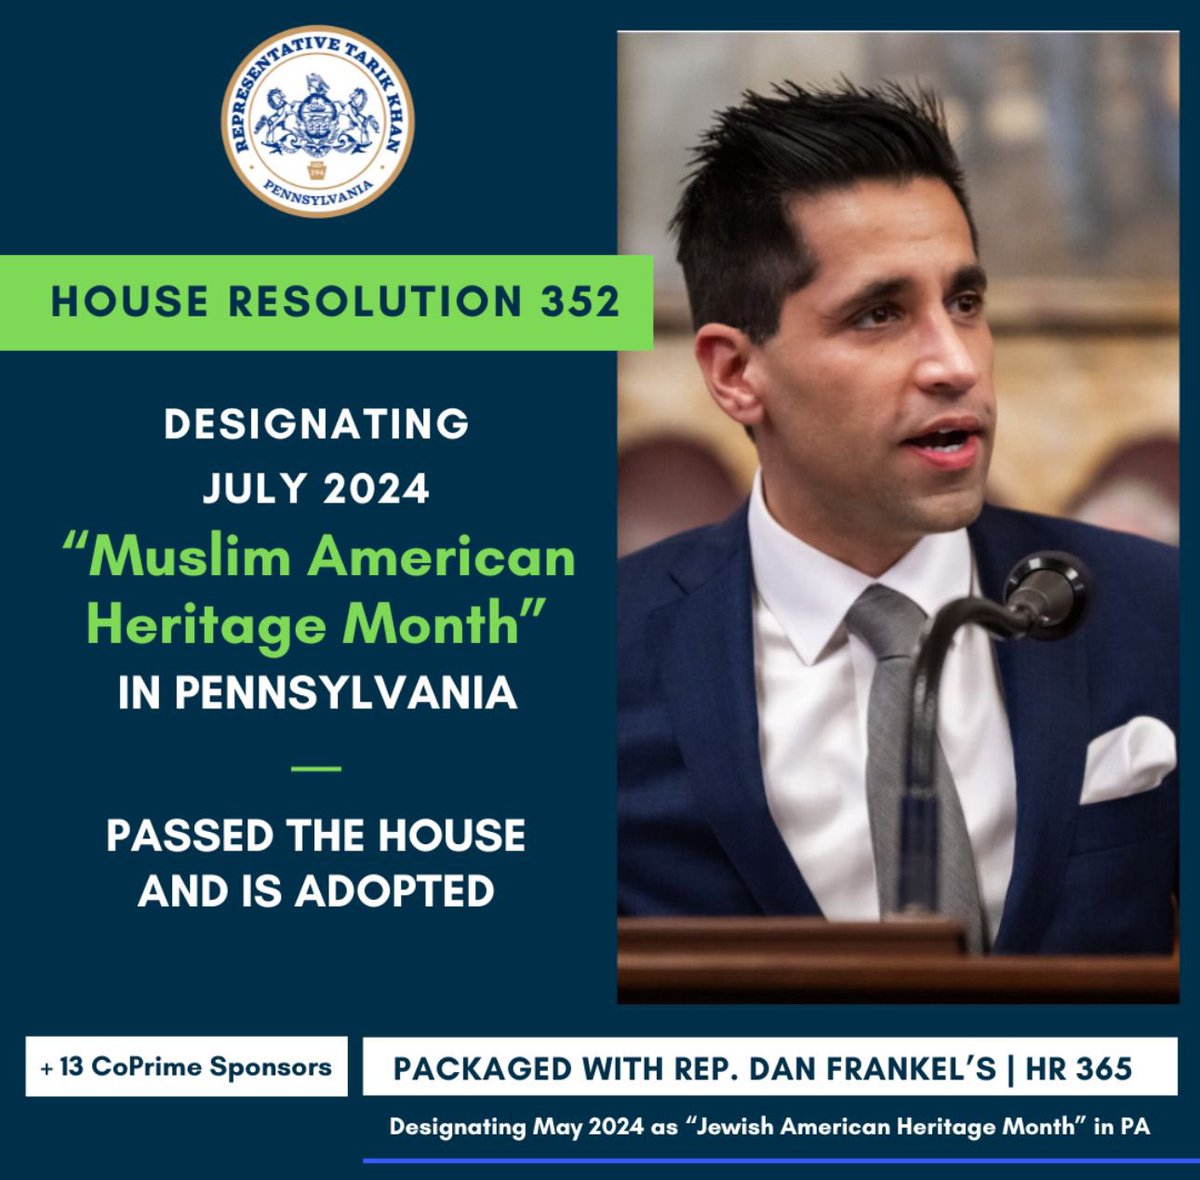 We’re thrilled to see the passage of House Resolution 352 designating July as “Muslim American Heritage Month”, in Pennsylvania. This is a great opportunity for representation and a more inclusive democracy. Thank you to our 13 co sponsors.